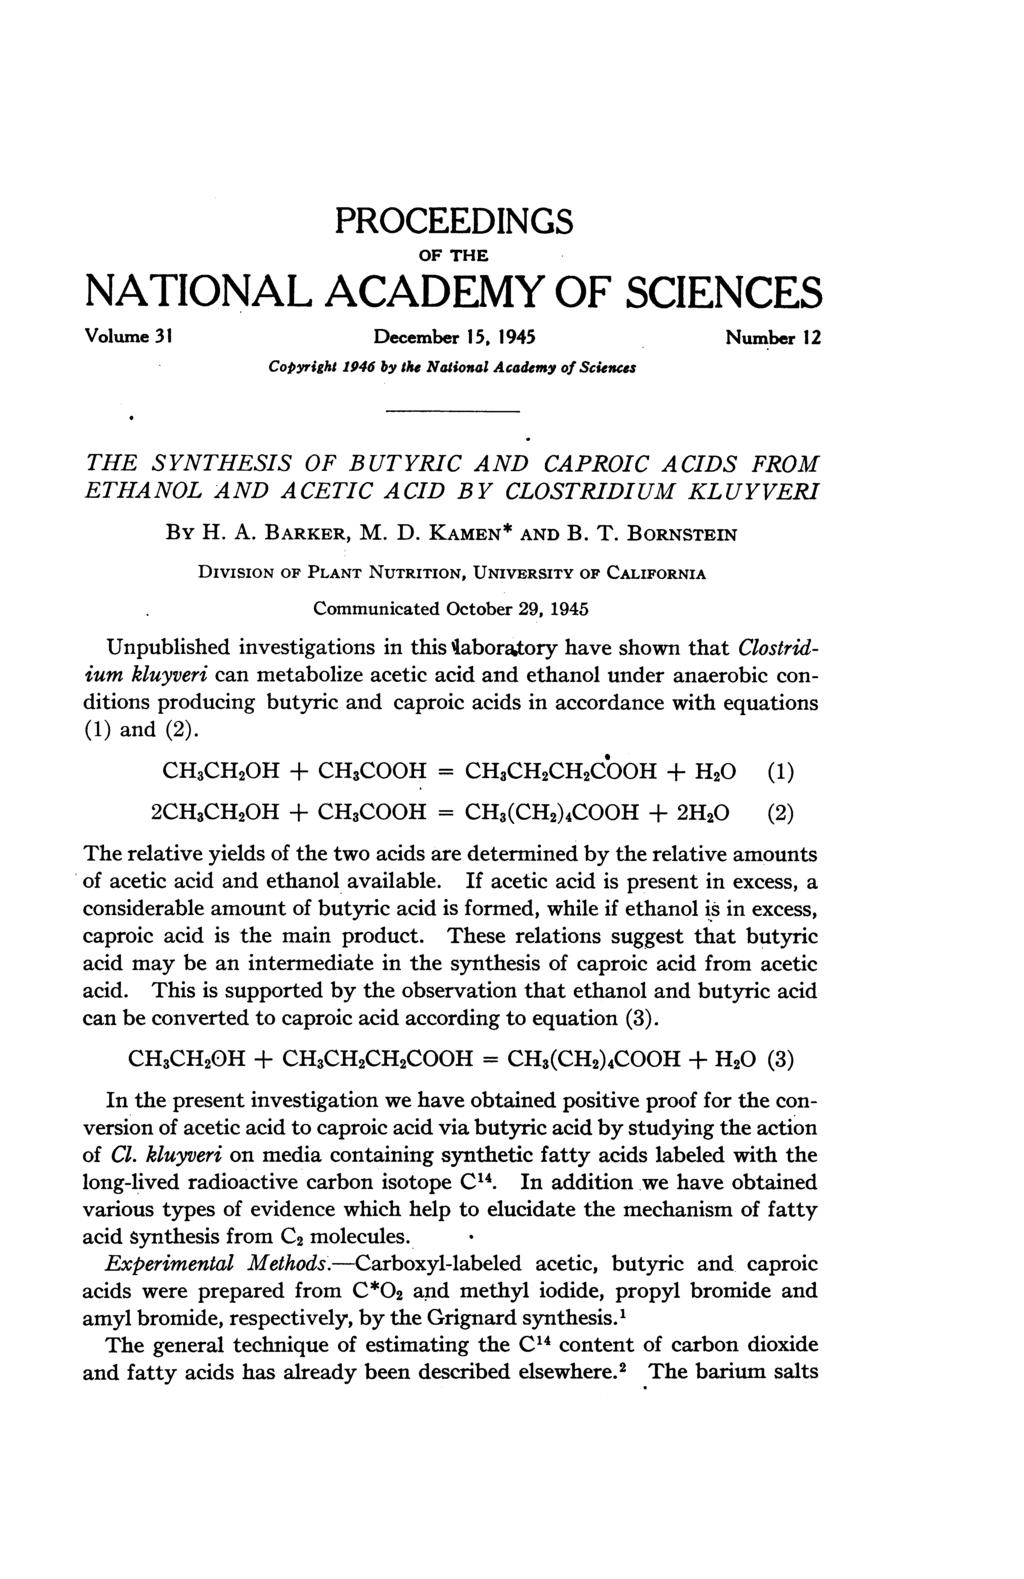 PROCEEDINGS OF THE NATIONAL ACADEMY OF SCIENCES Volume 31 December 15.